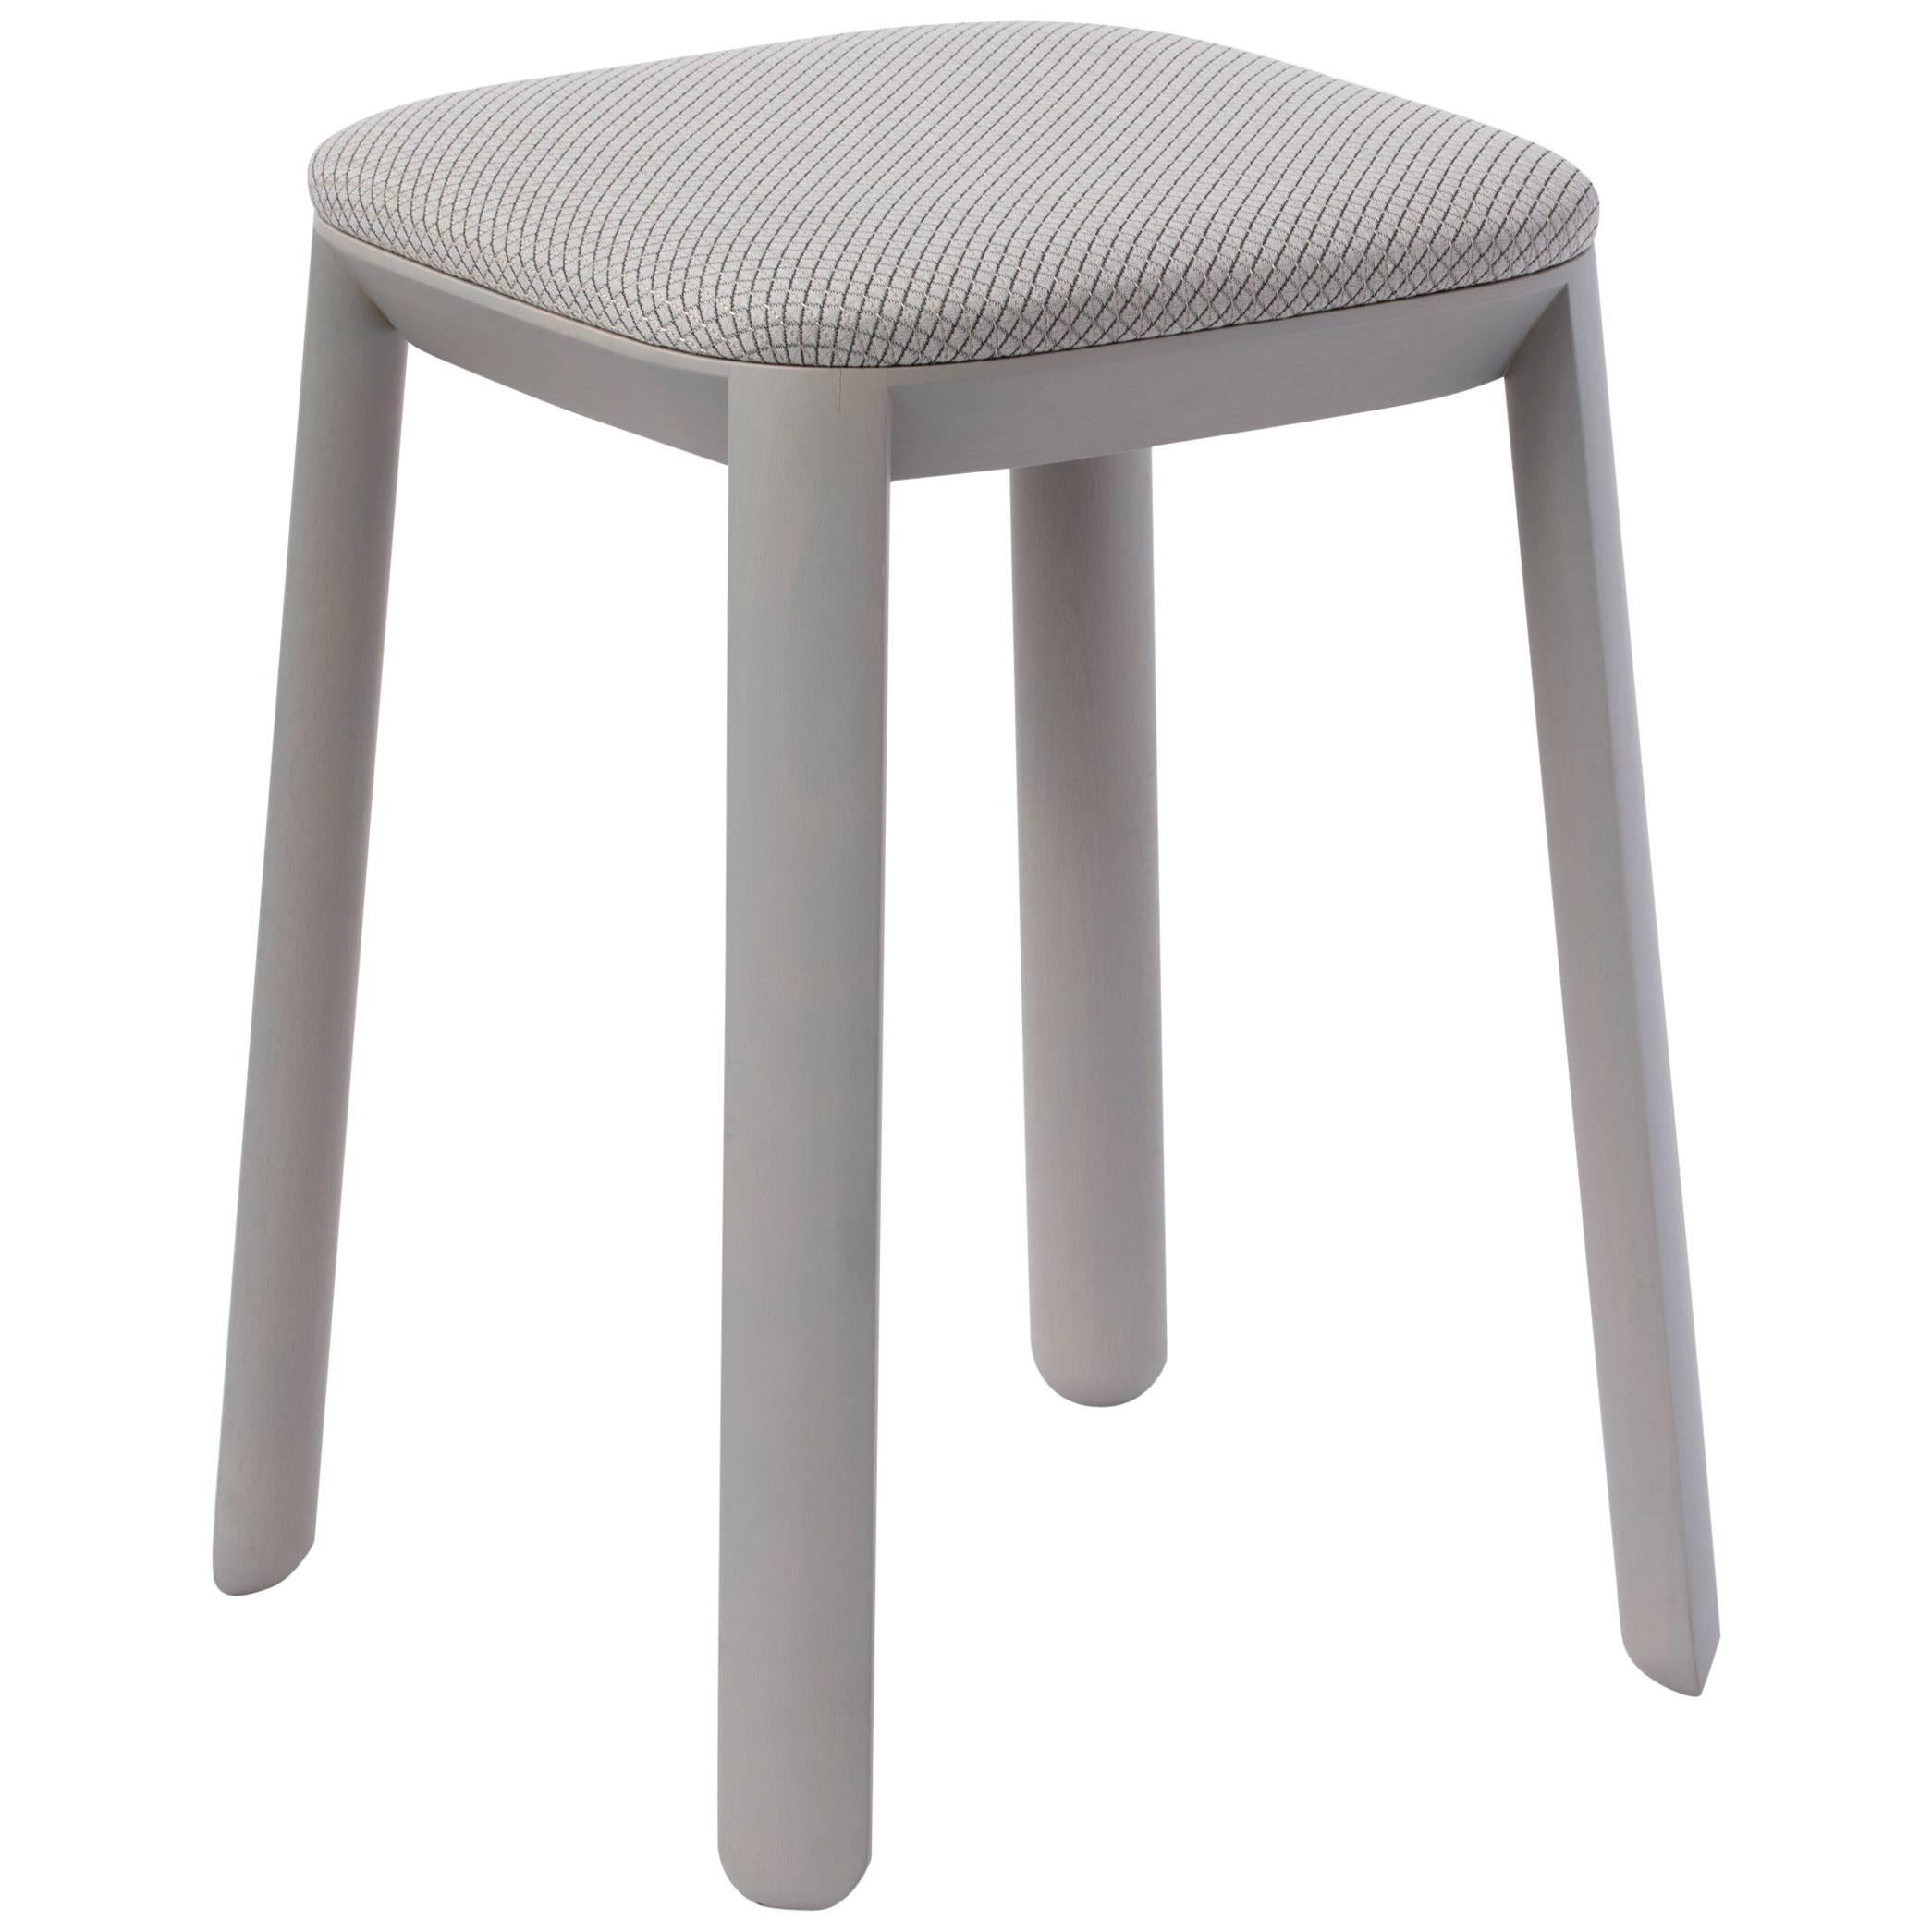 Covered Stool by Scholten & Baijings for Maharam